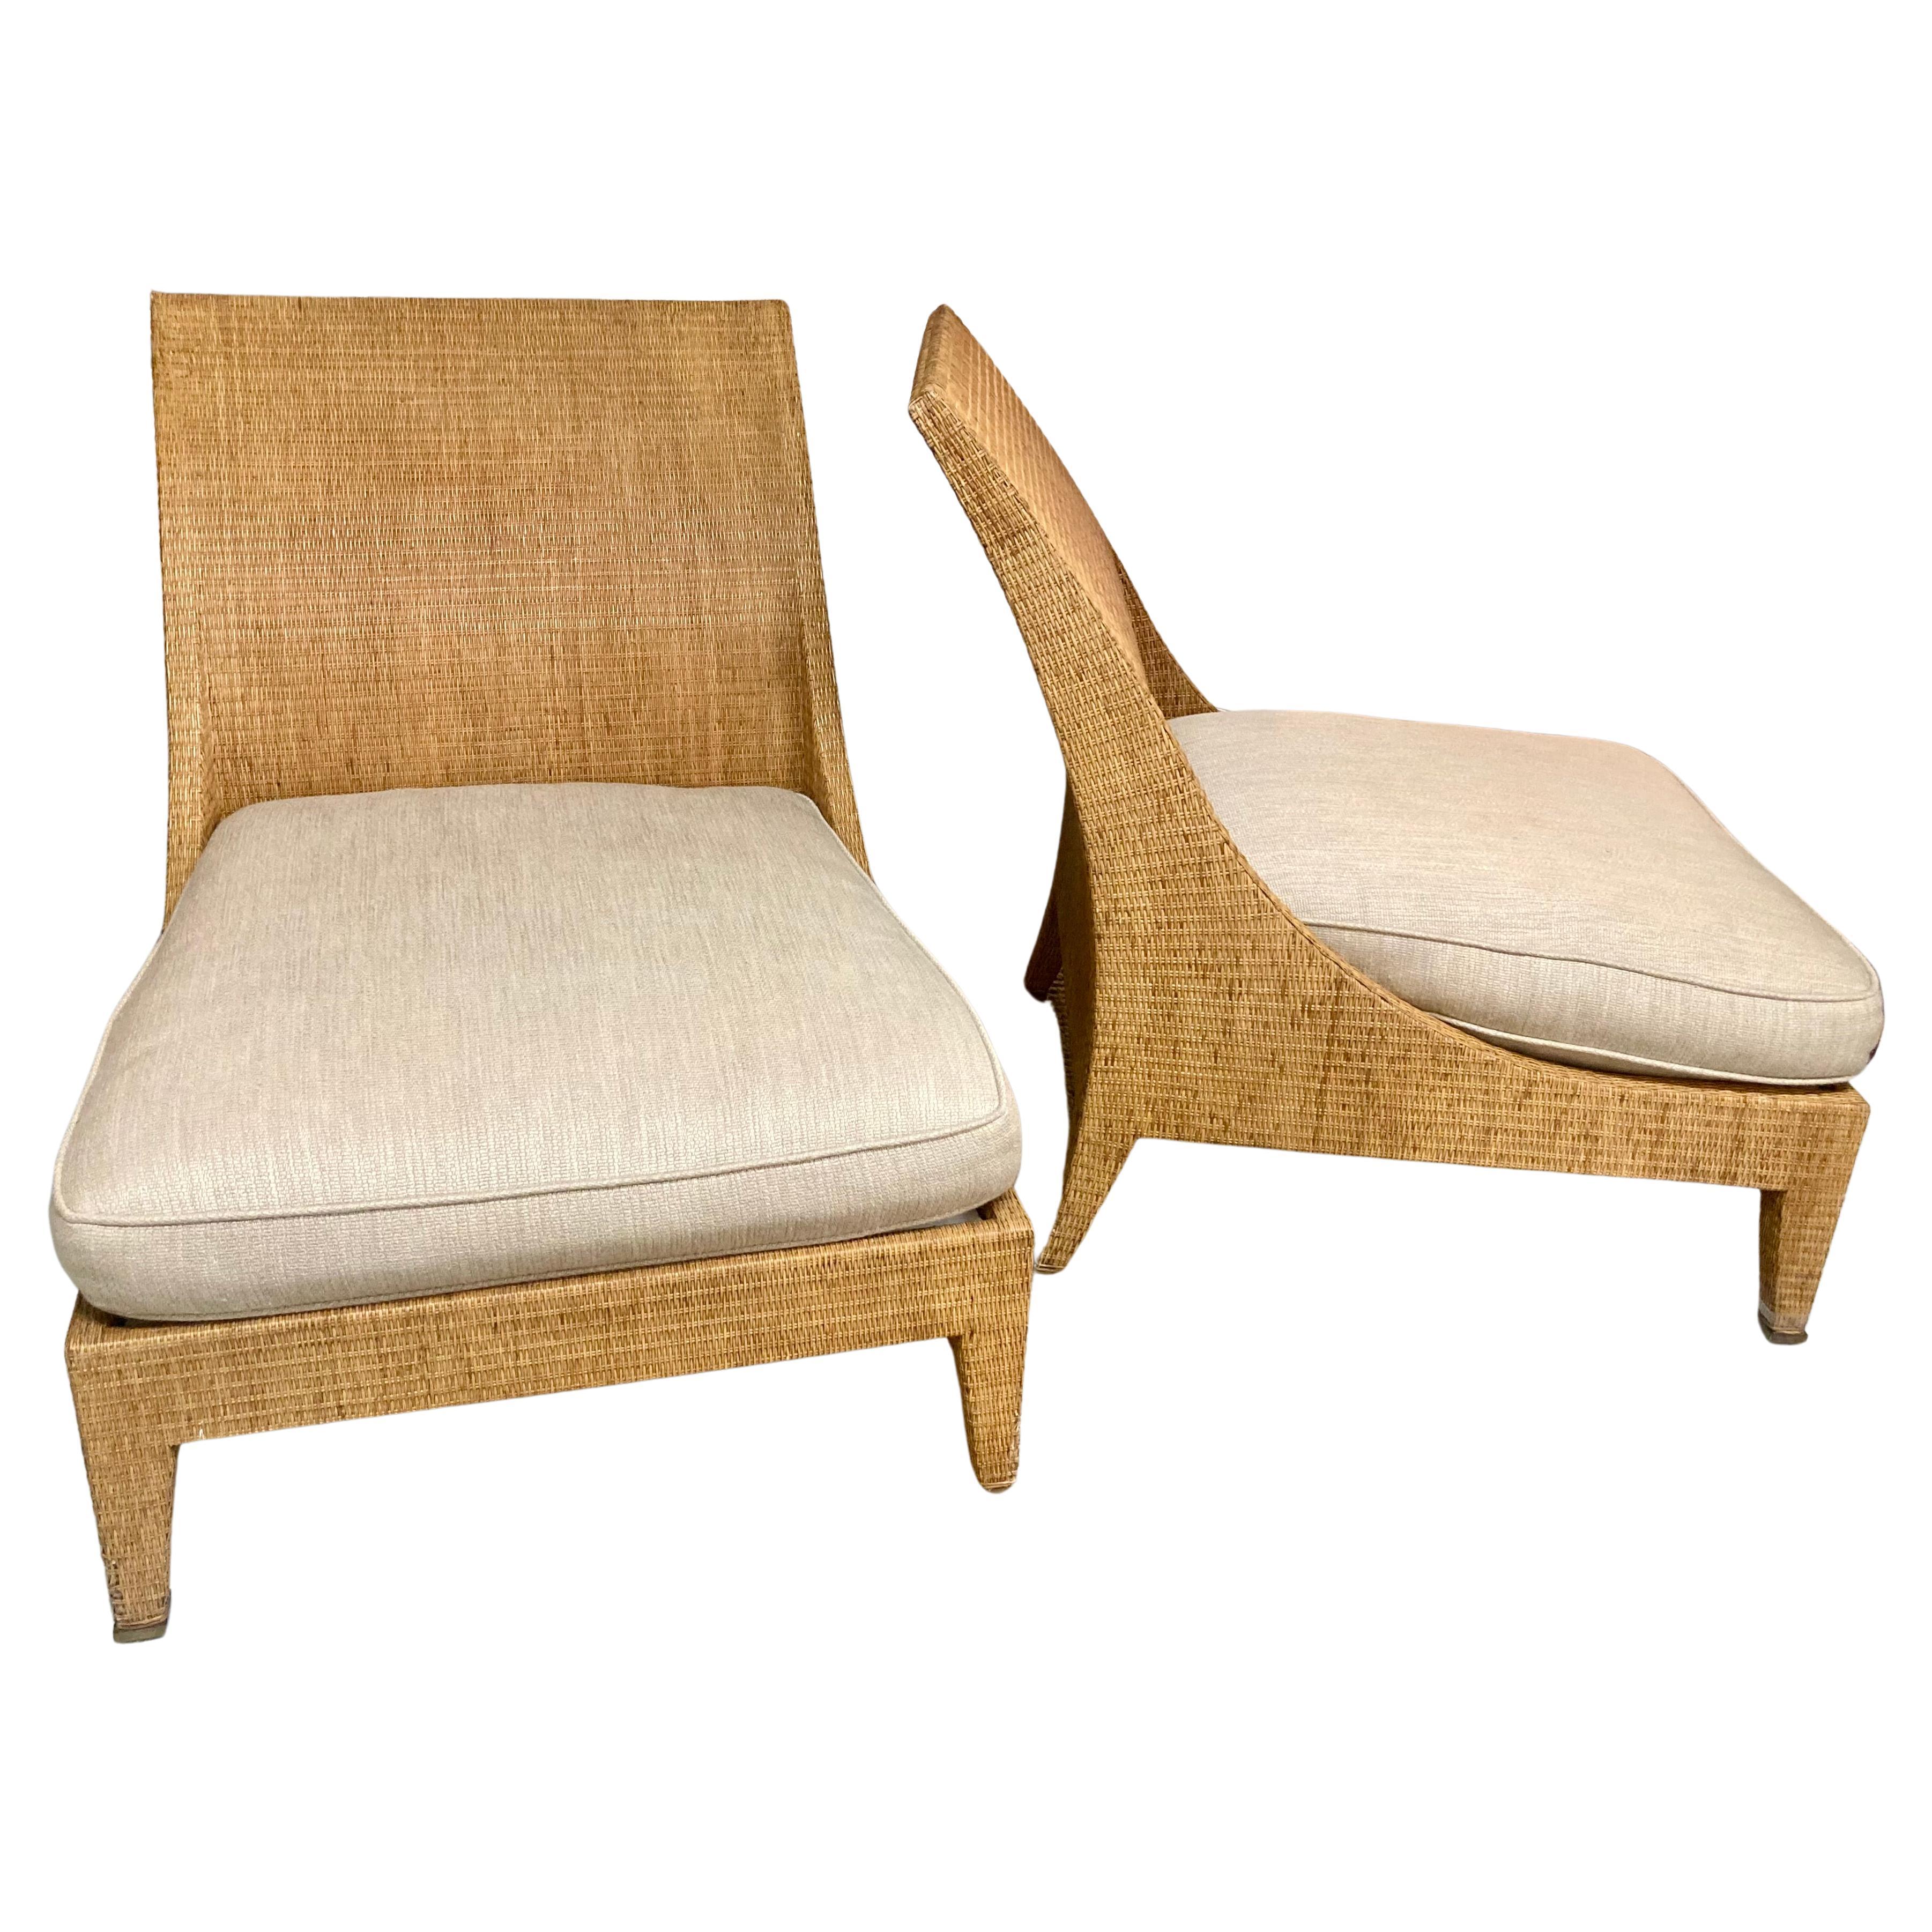 Jacques Garcia for McGuire Woven Raffia Large Club Chairs, a Pair For Sale